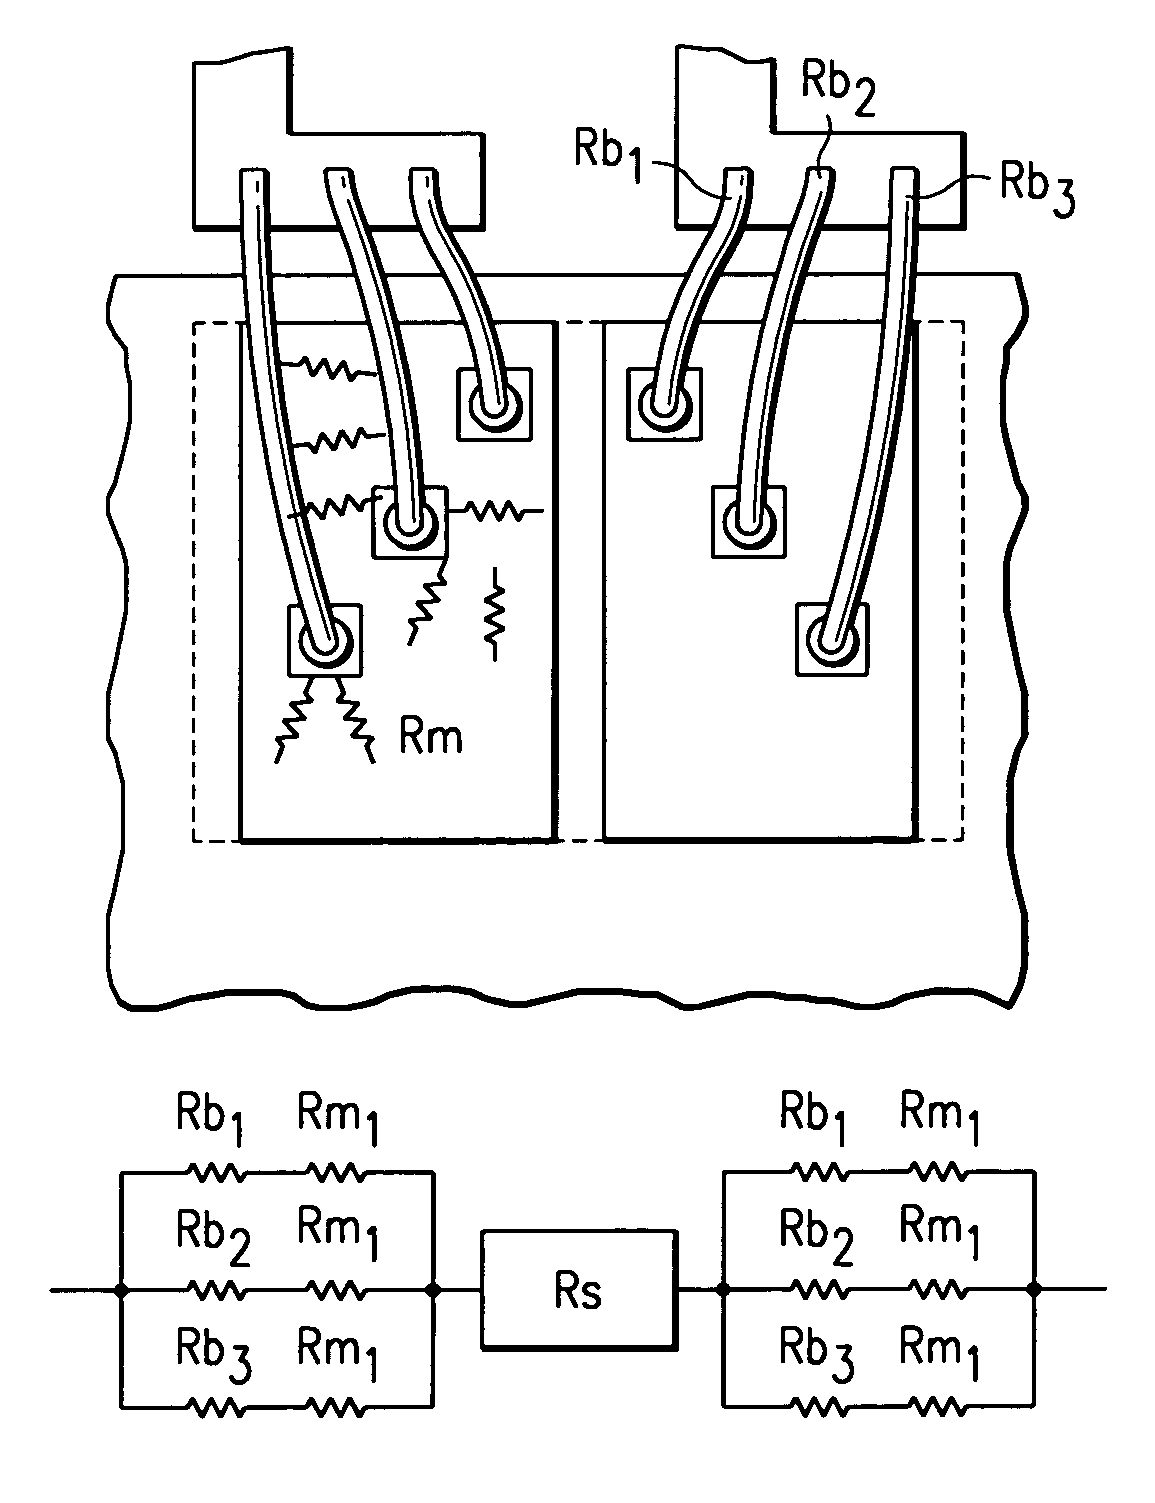 Integrated power circuits with distributed bonding and current flow